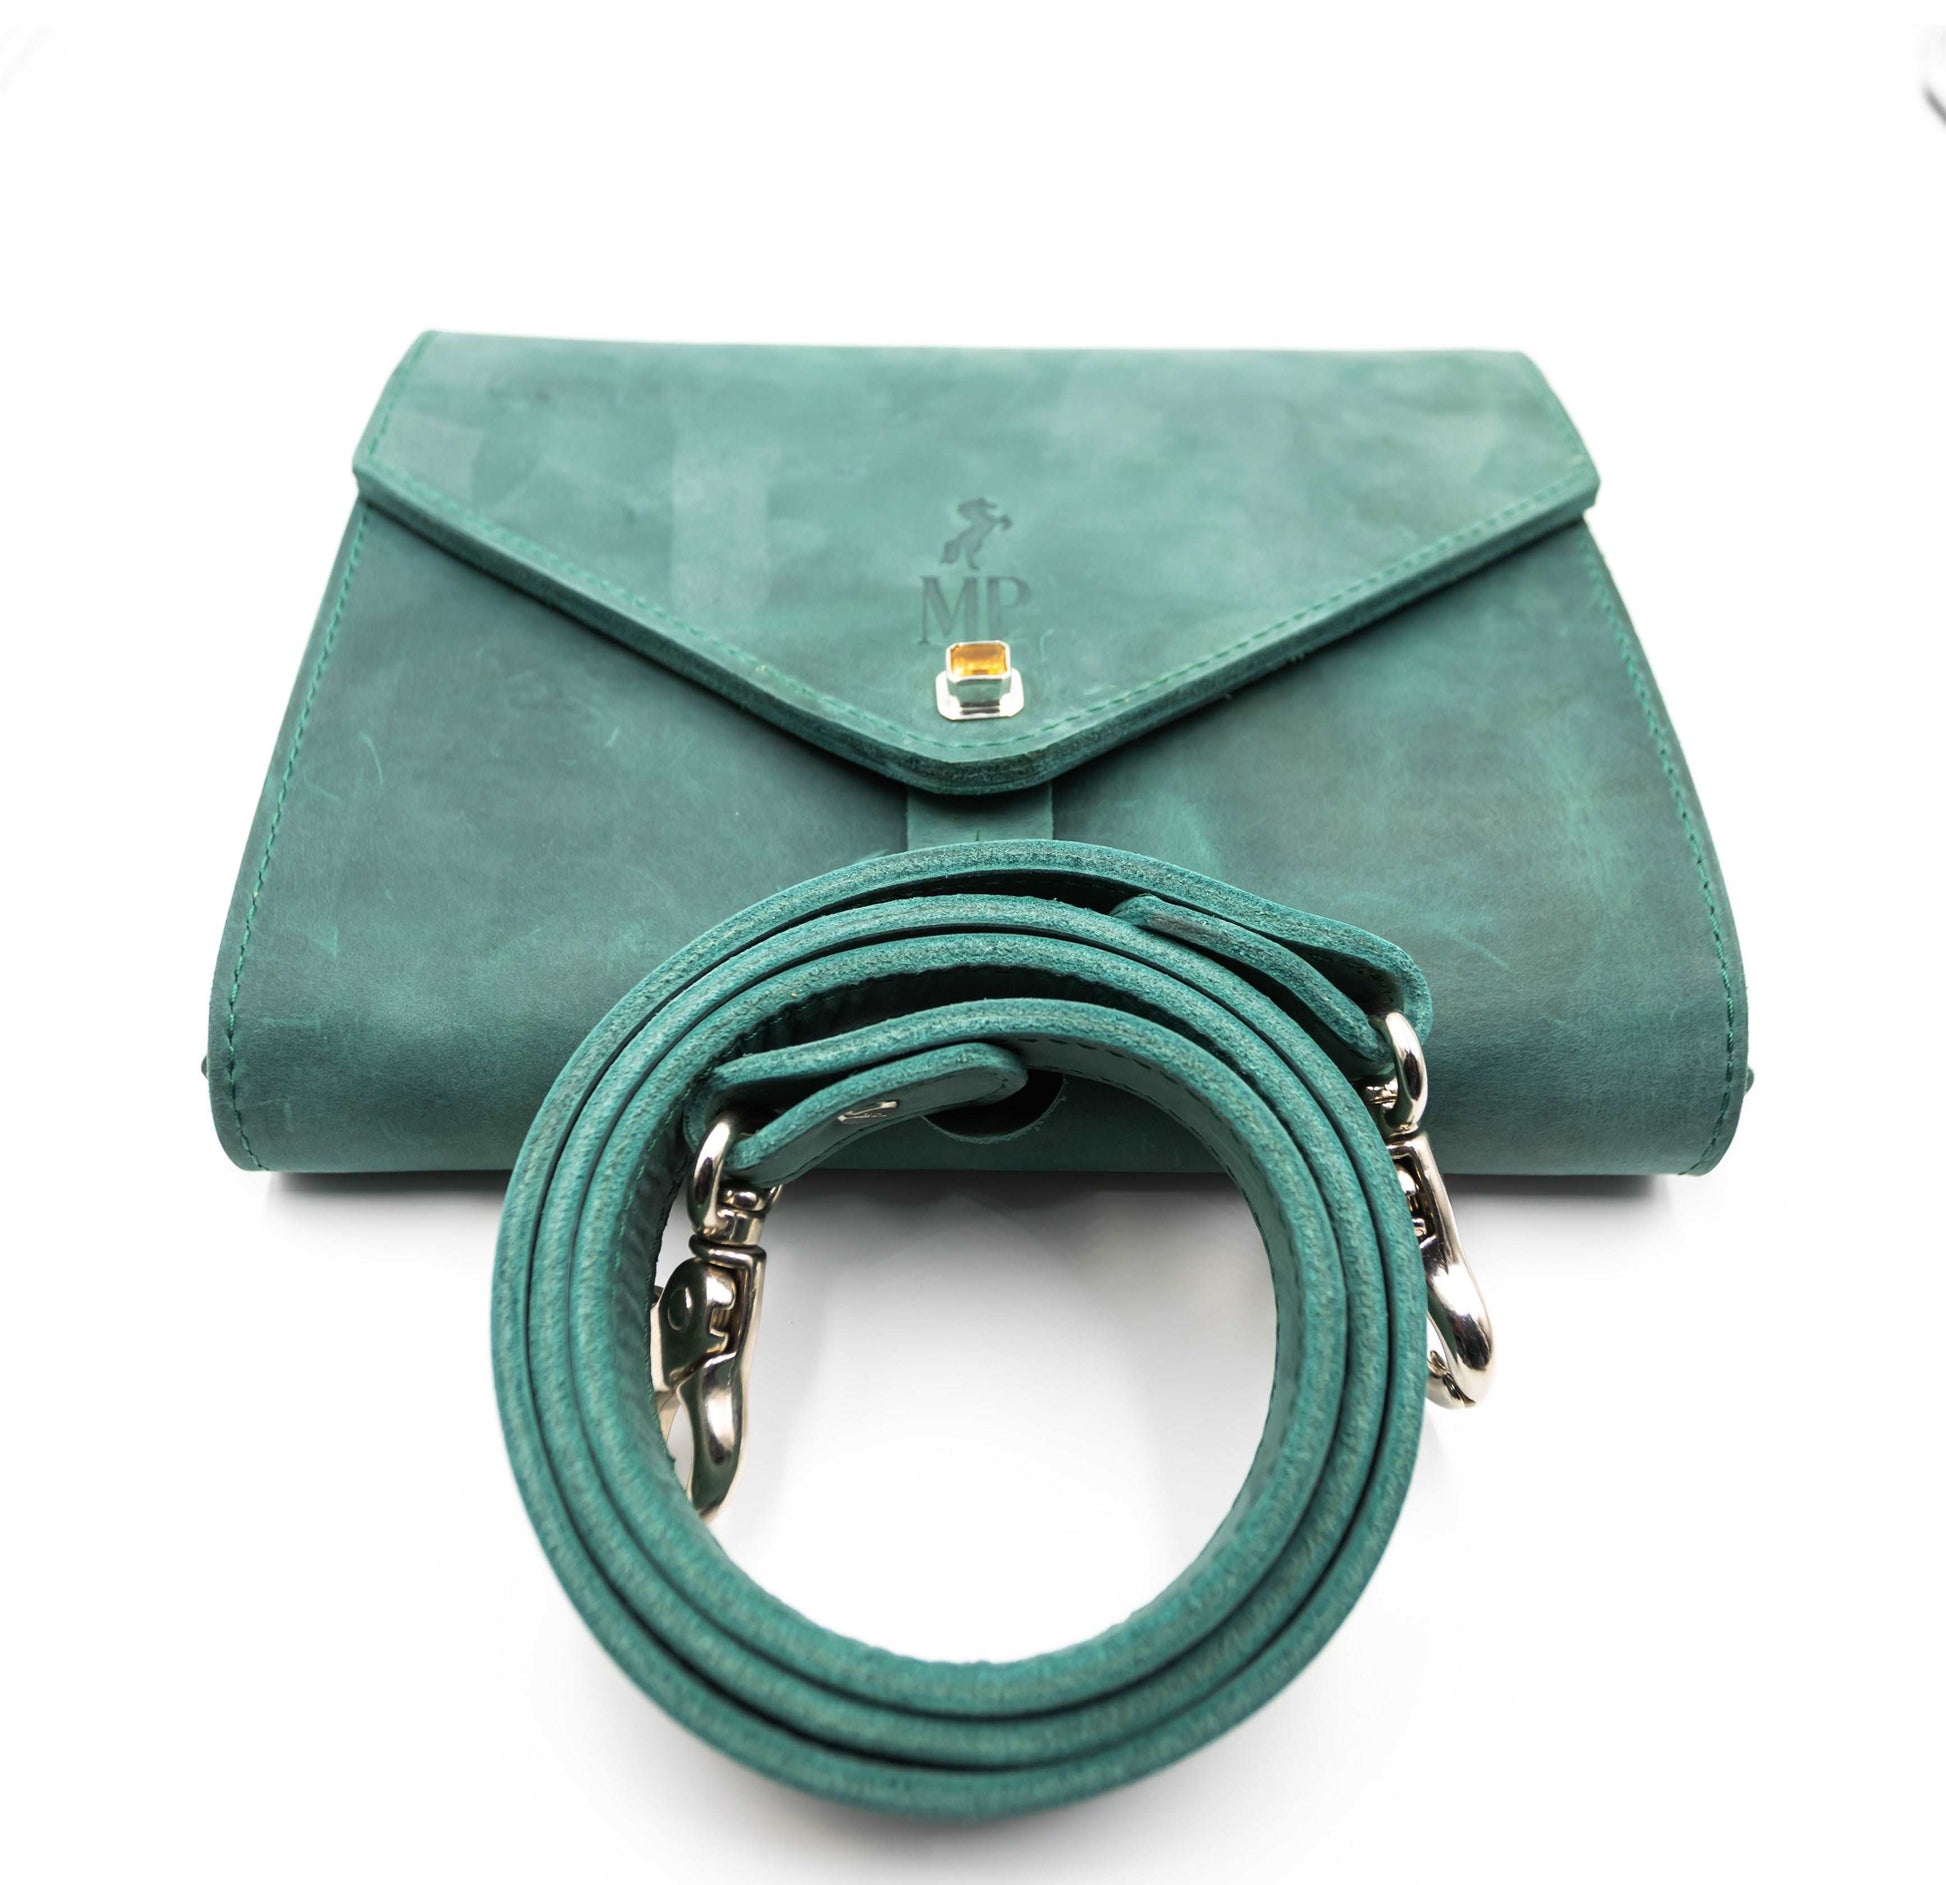 Citrine Turquoise Country Cow Leather Bag - MP Equestrian 